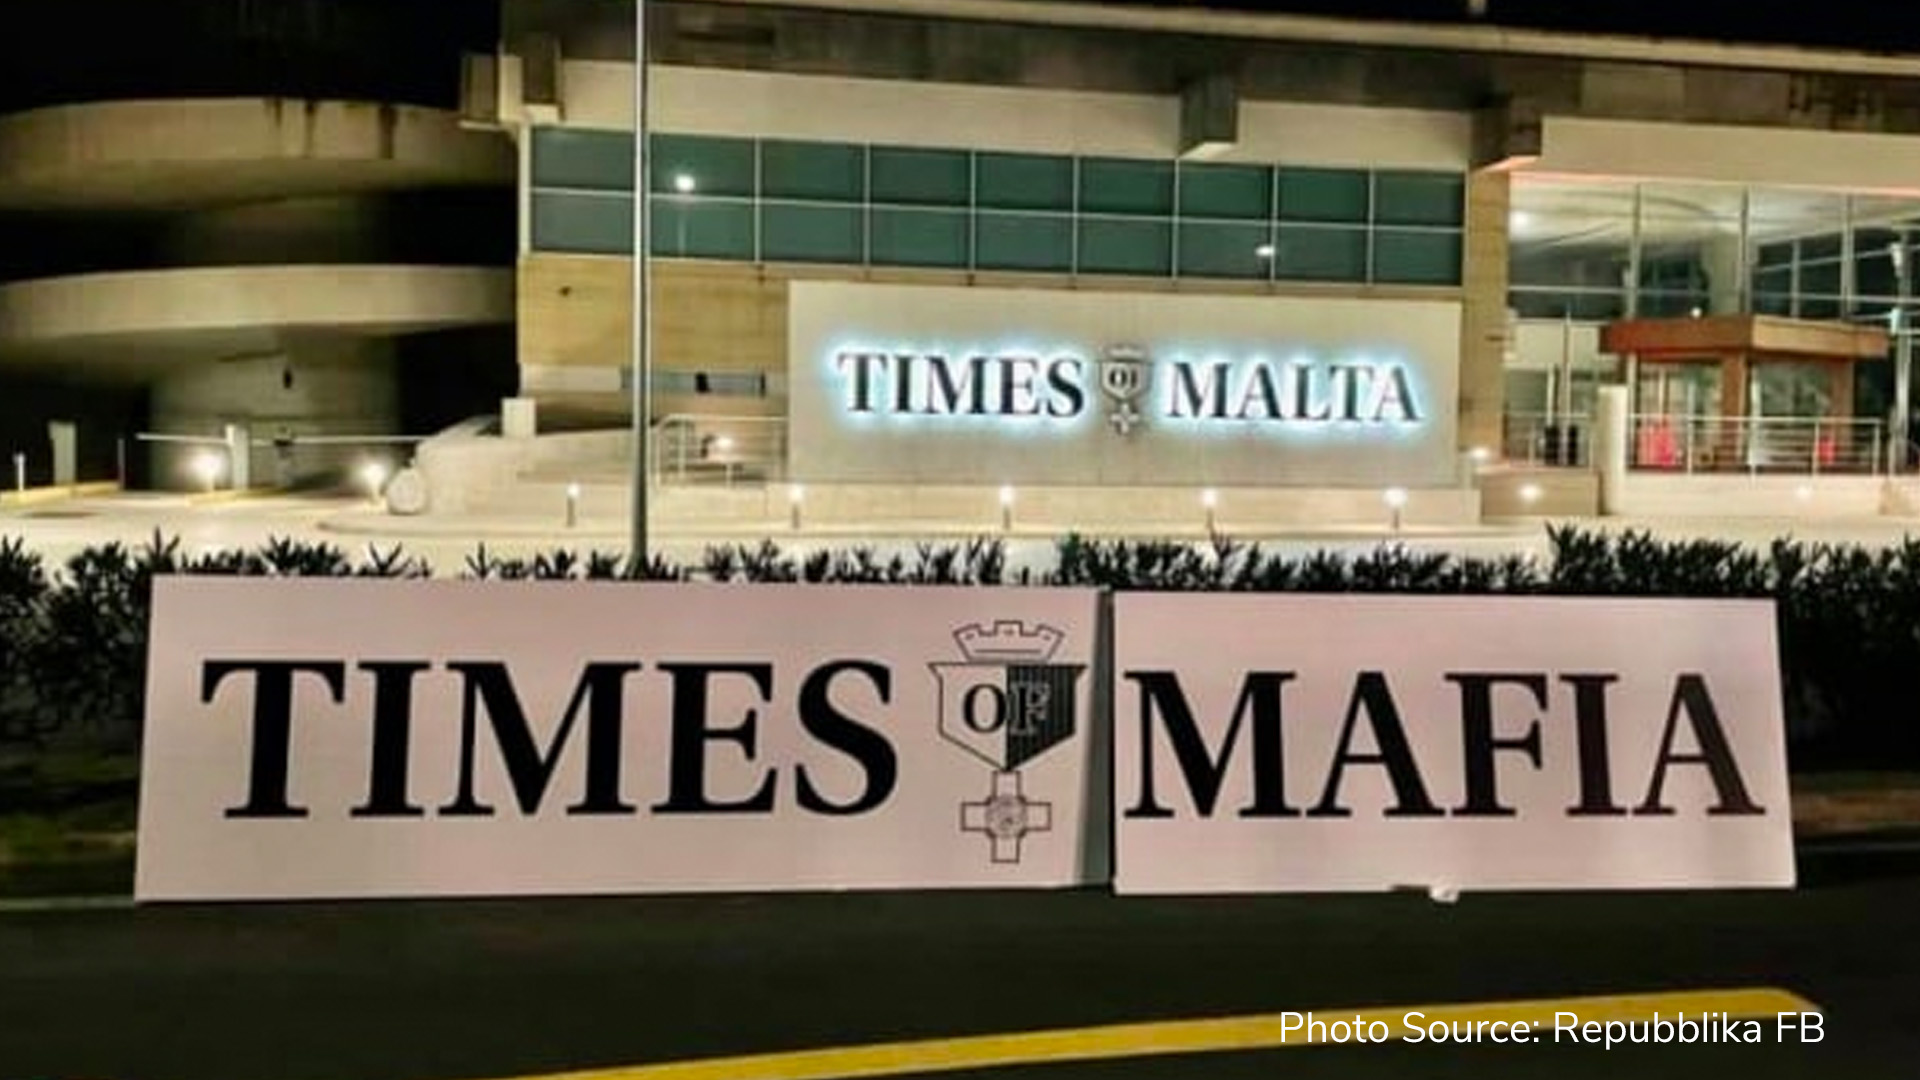 Repubblika state times of mafia banner was not their doing